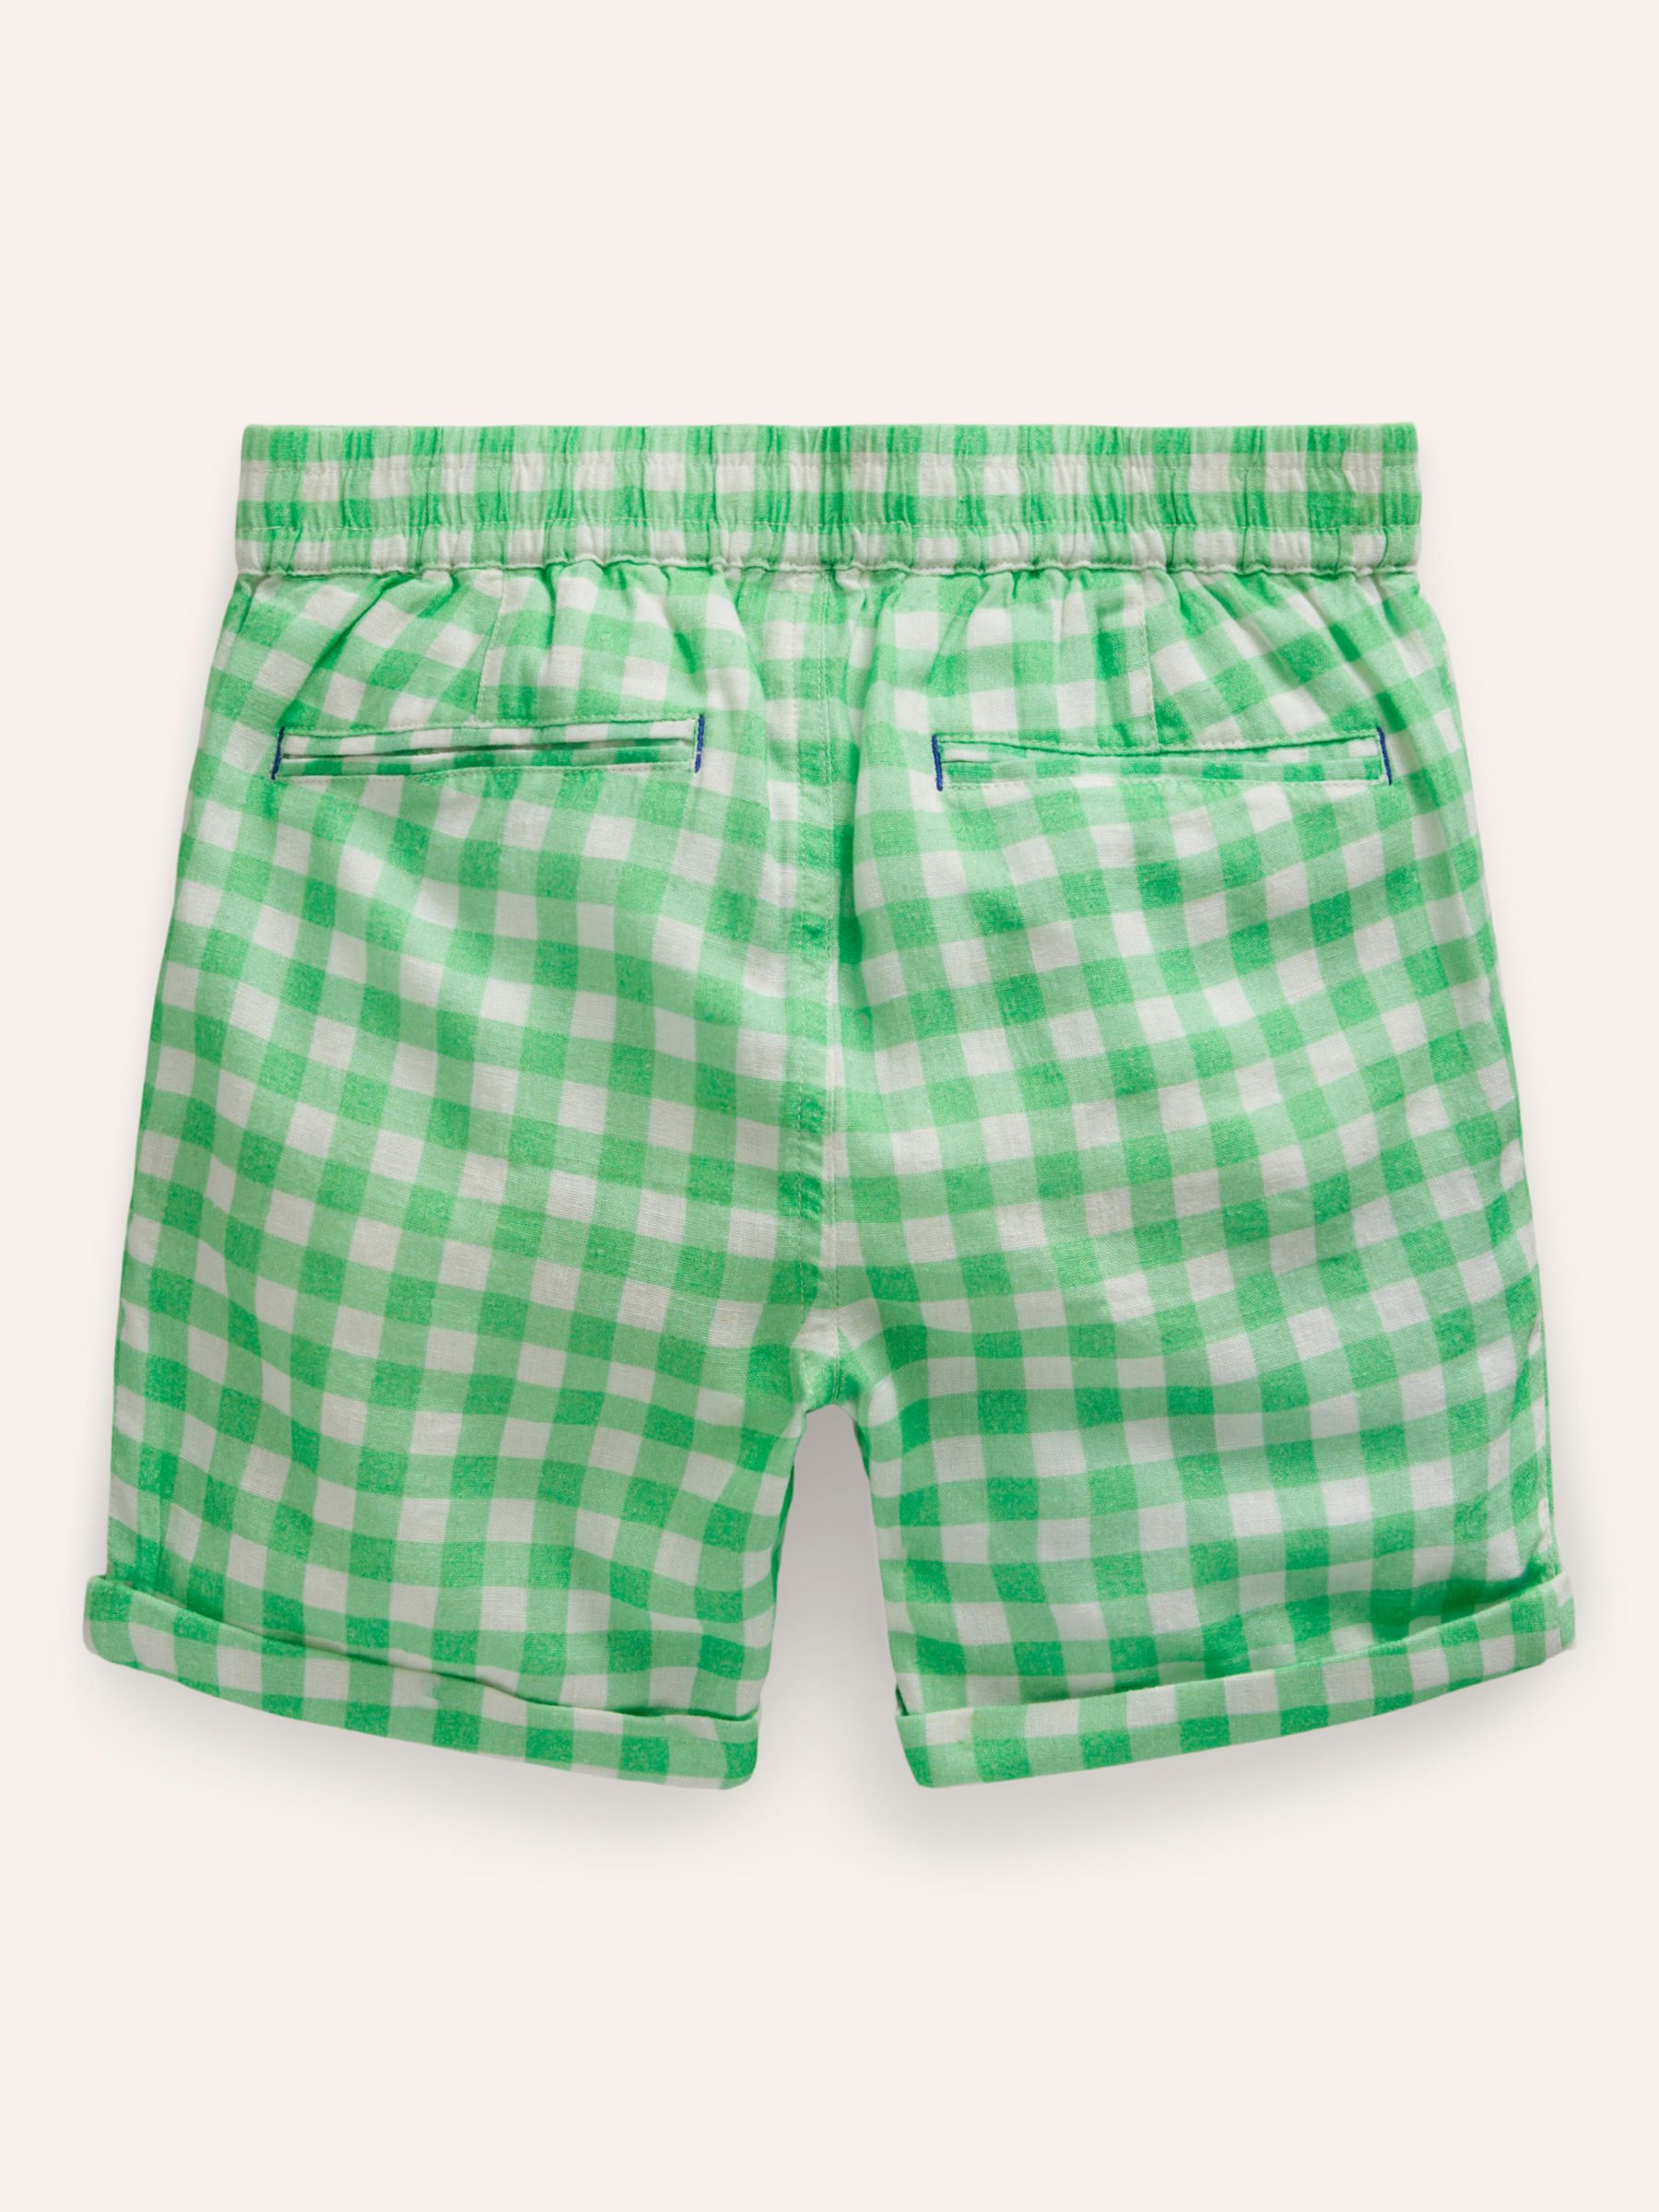 Mini Boden Kids' Gingham Smart Roll Up Shorts, Pea Green, 12-18 months